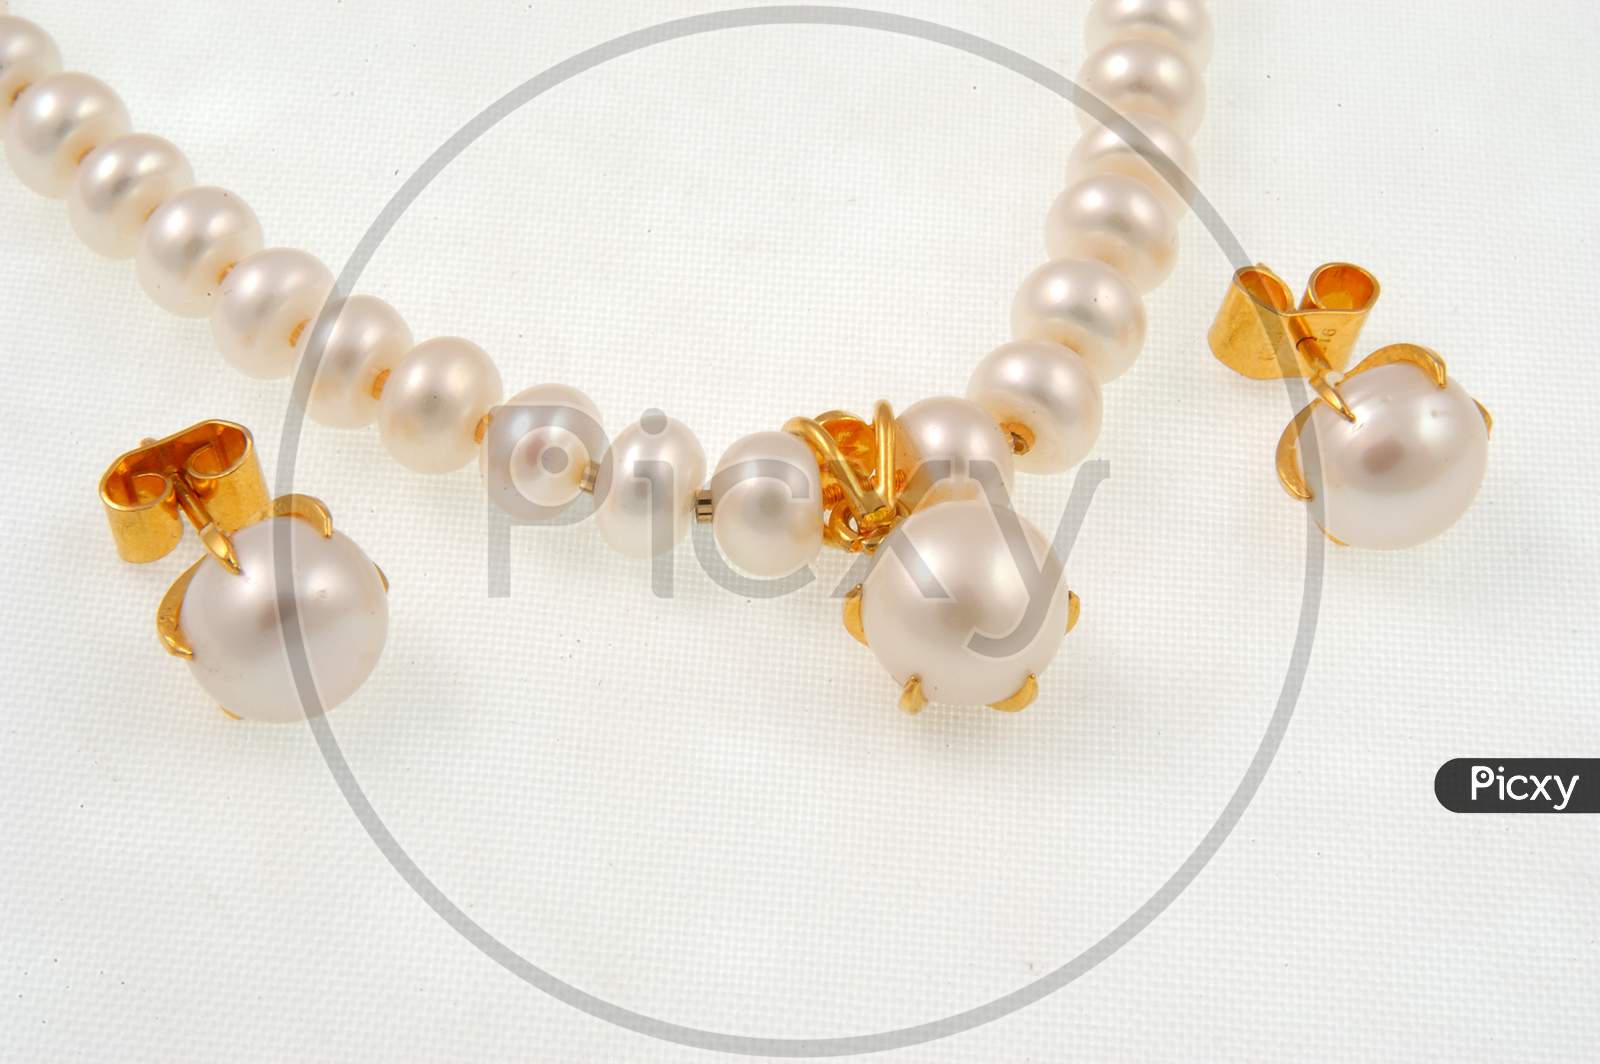 Diamond Necklace Jewelery  With White Pearls And Ear Rings  Over an Isolated White Background